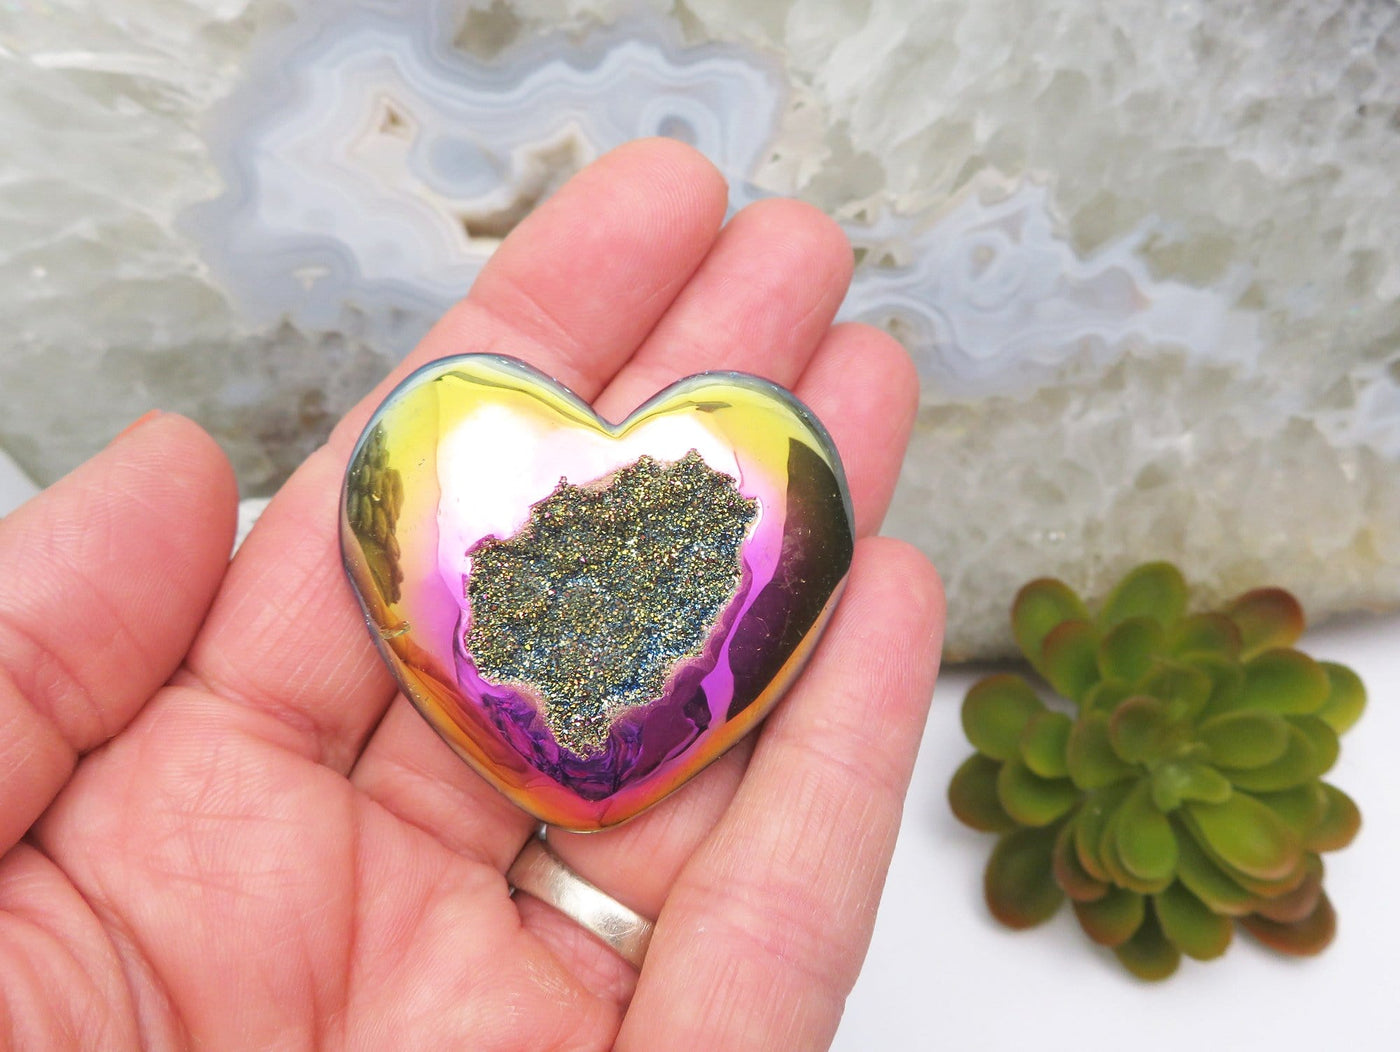 Titanium Druzy Hearts in rainbow in a hand for size reference